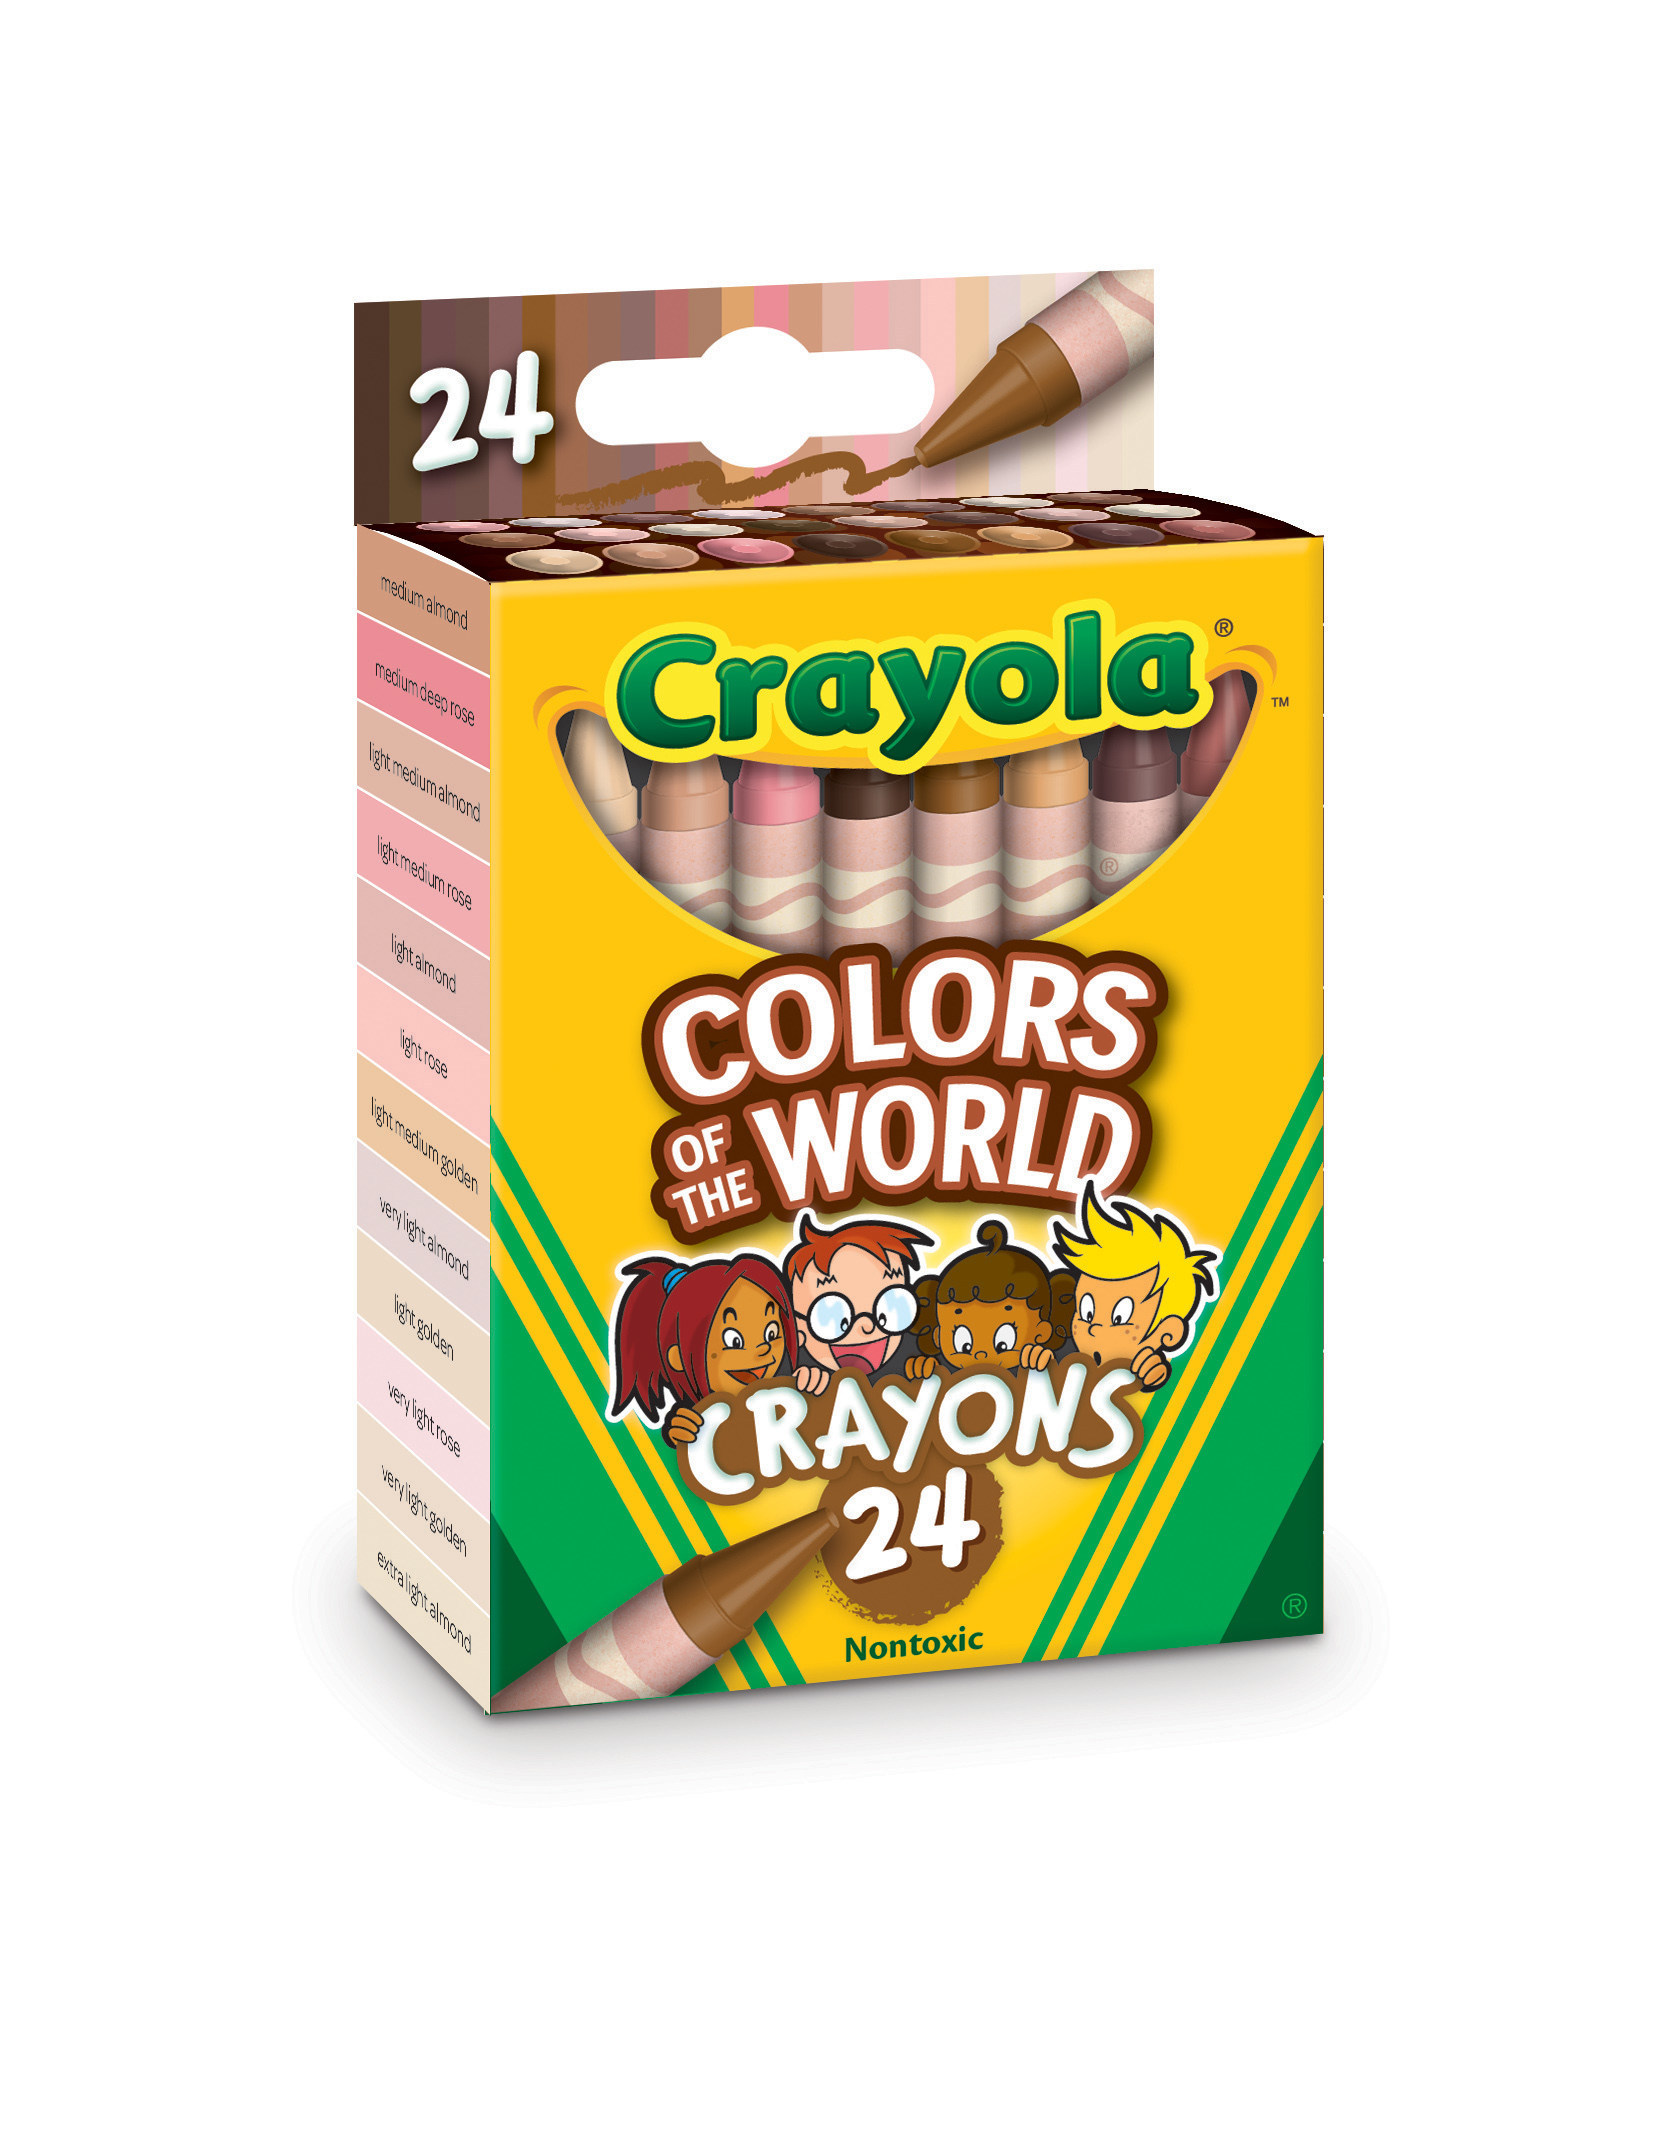 A package of a variety of skin tone crayons